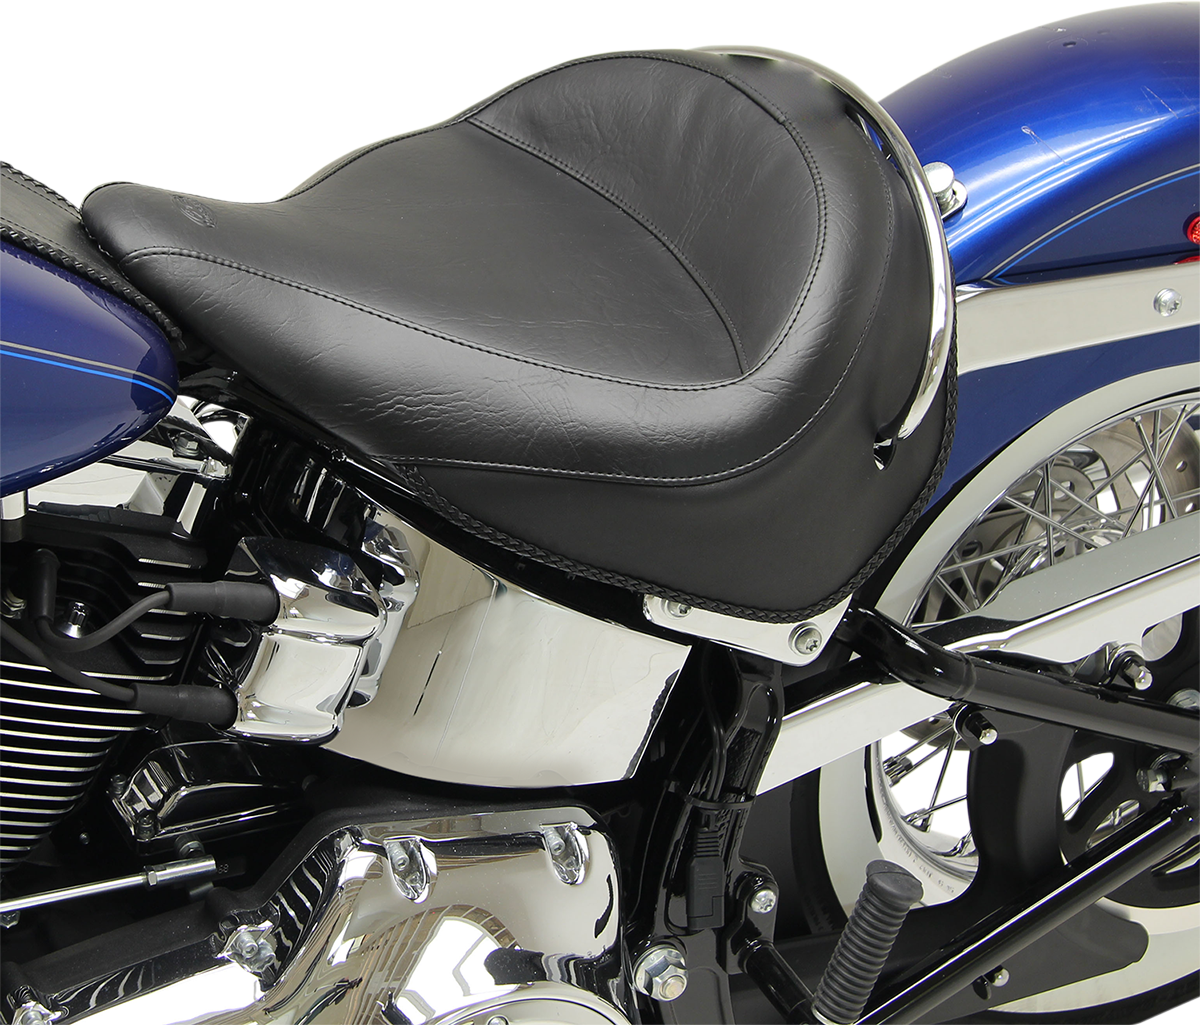 Mustang Vintage Wide Solo Vinyl Seat for 2005-2017 Harley Softail Deluxe FLSTN